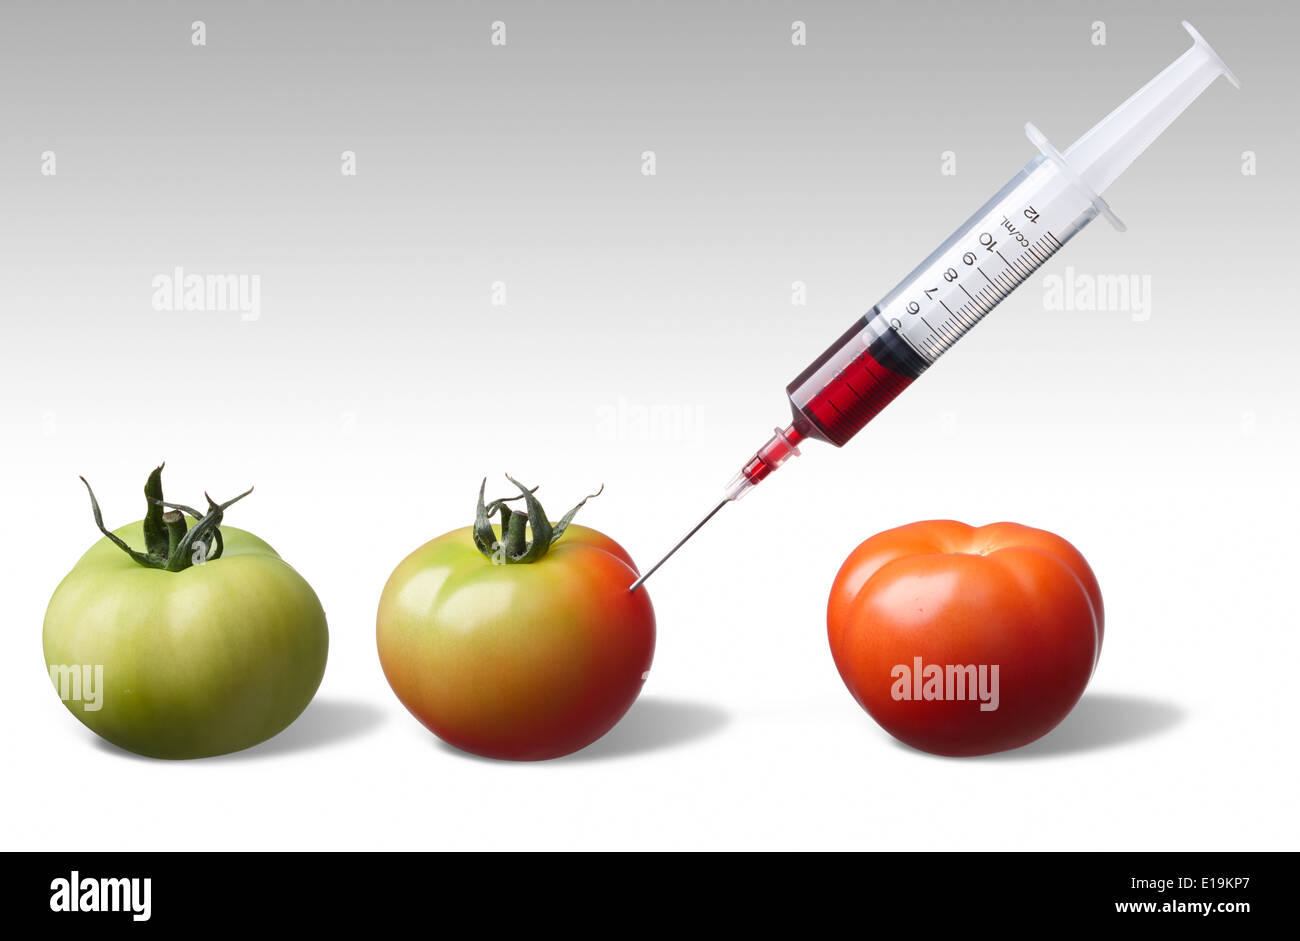 injecting unripe tomato forcing it to ripe faster Stock Photo